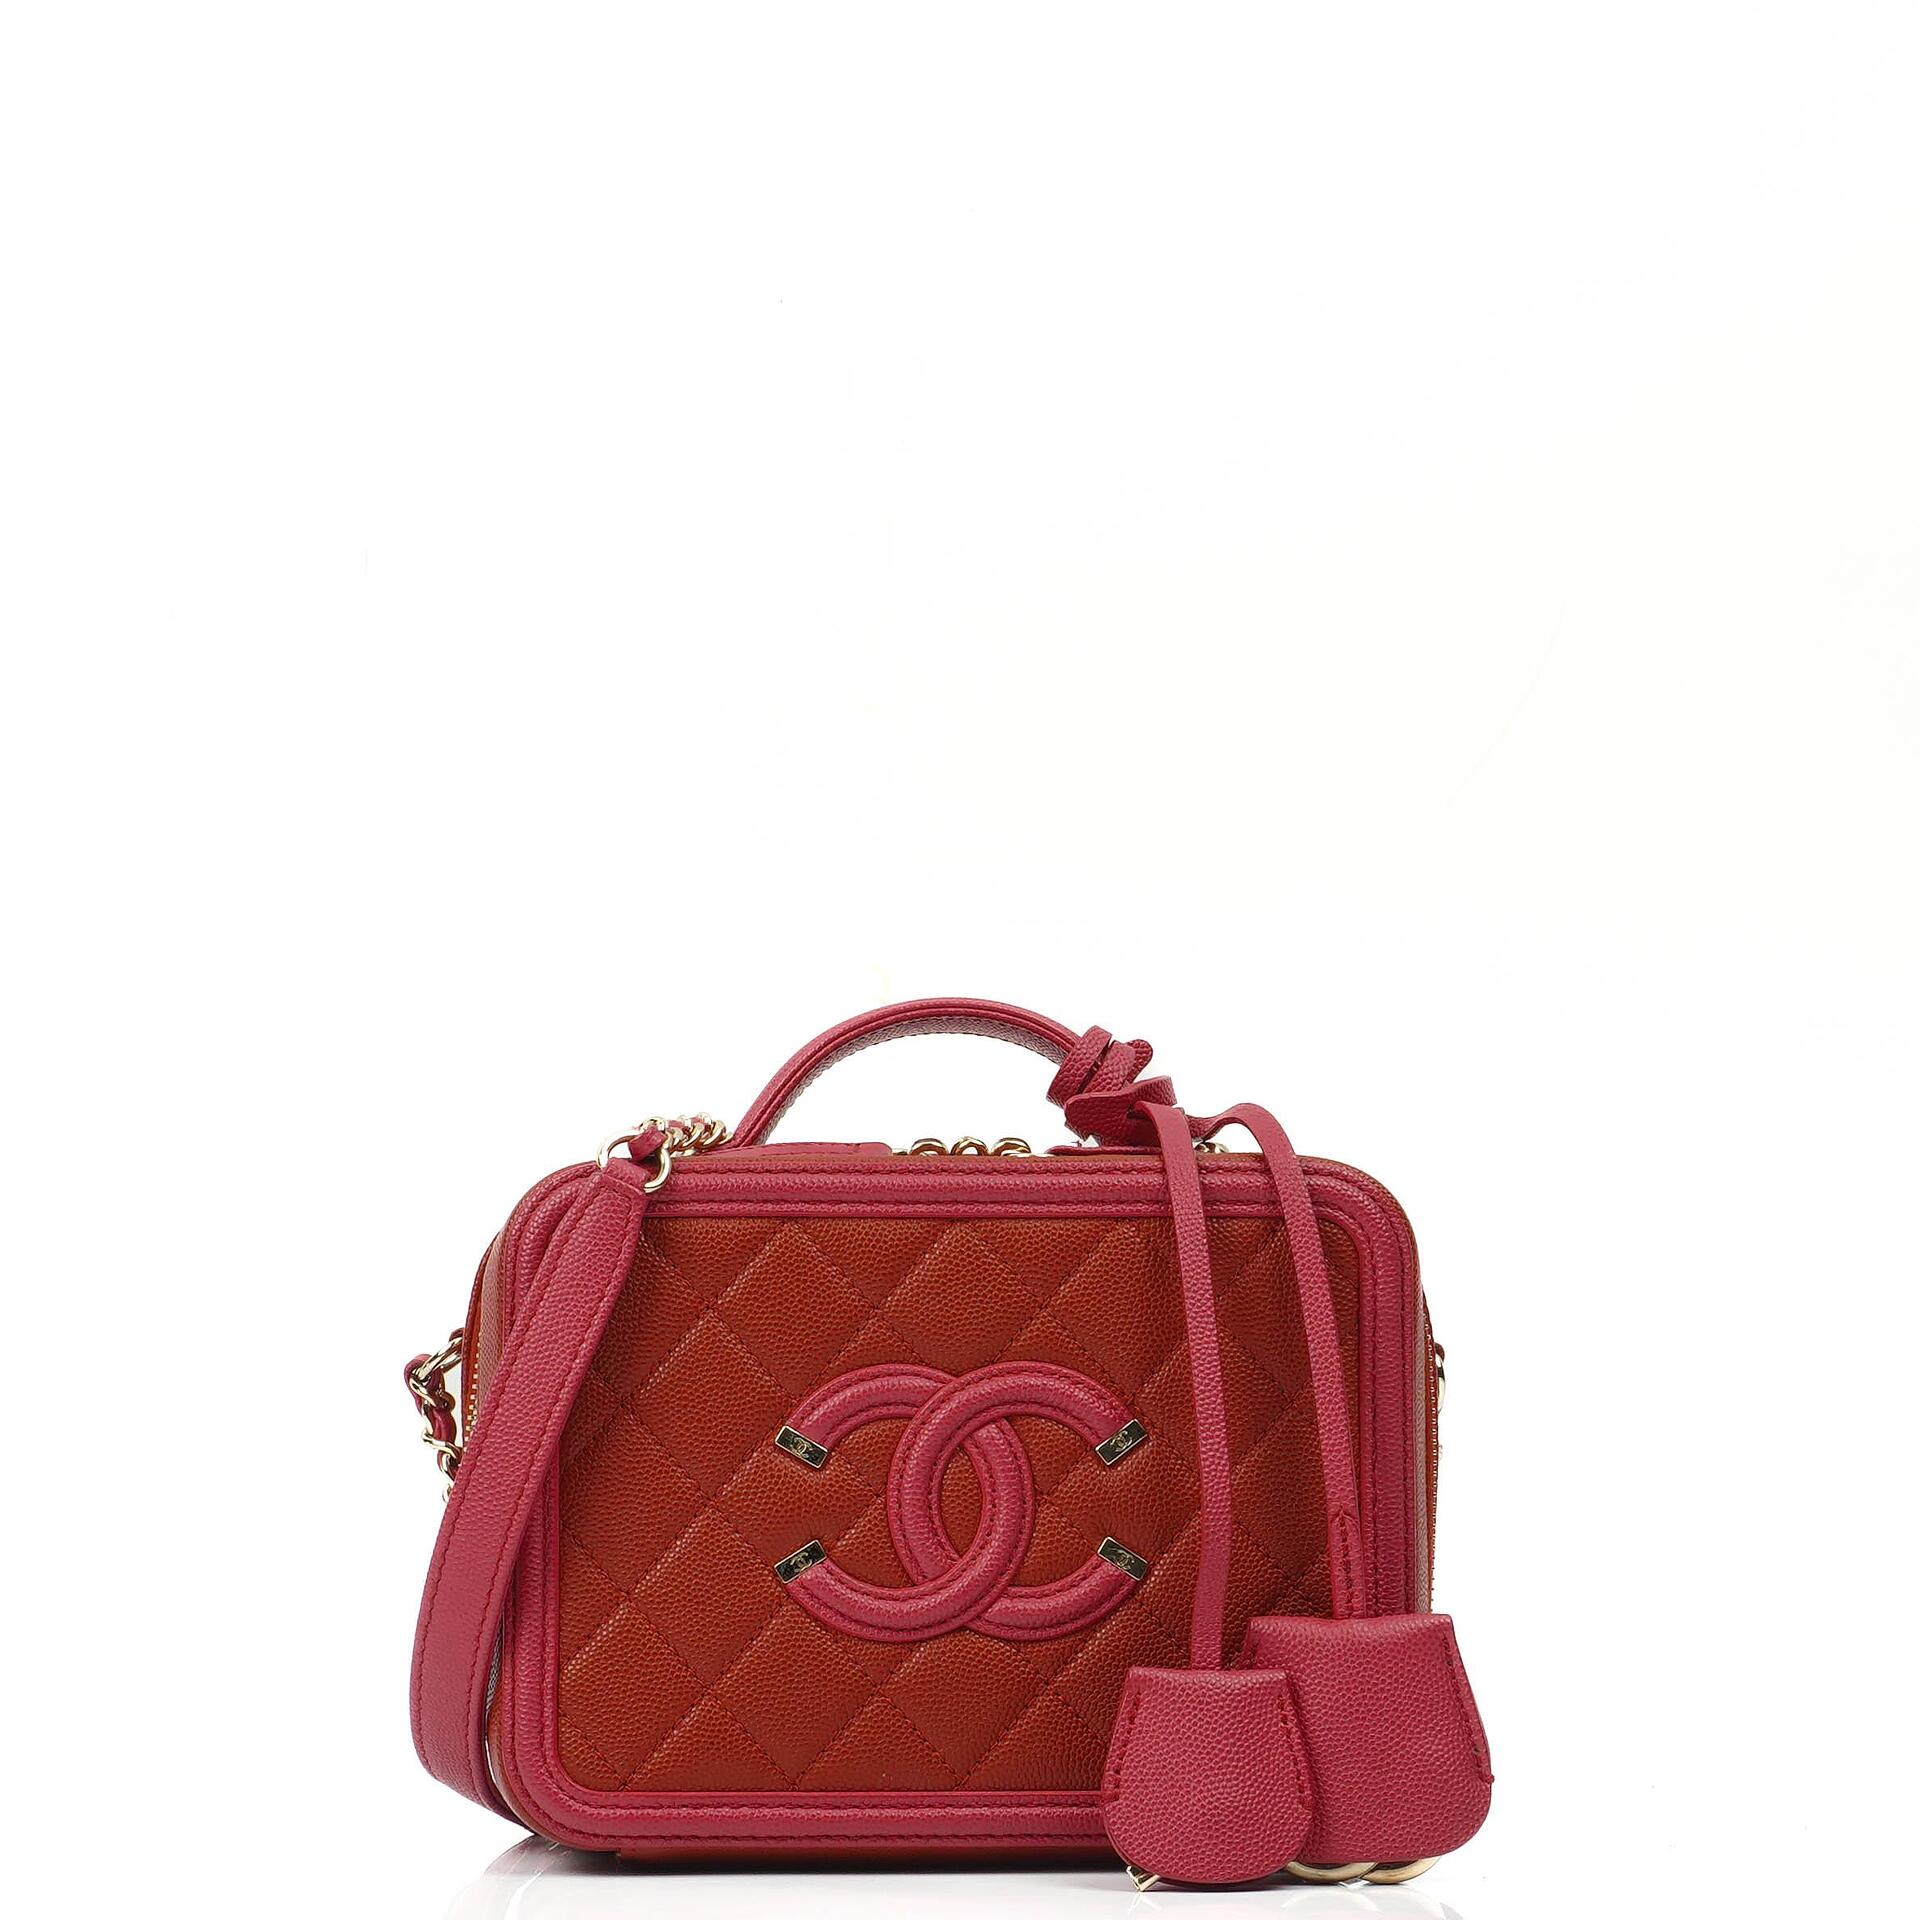 Chanel - Pink Striped Caviar Leather Filigree Vanity Small